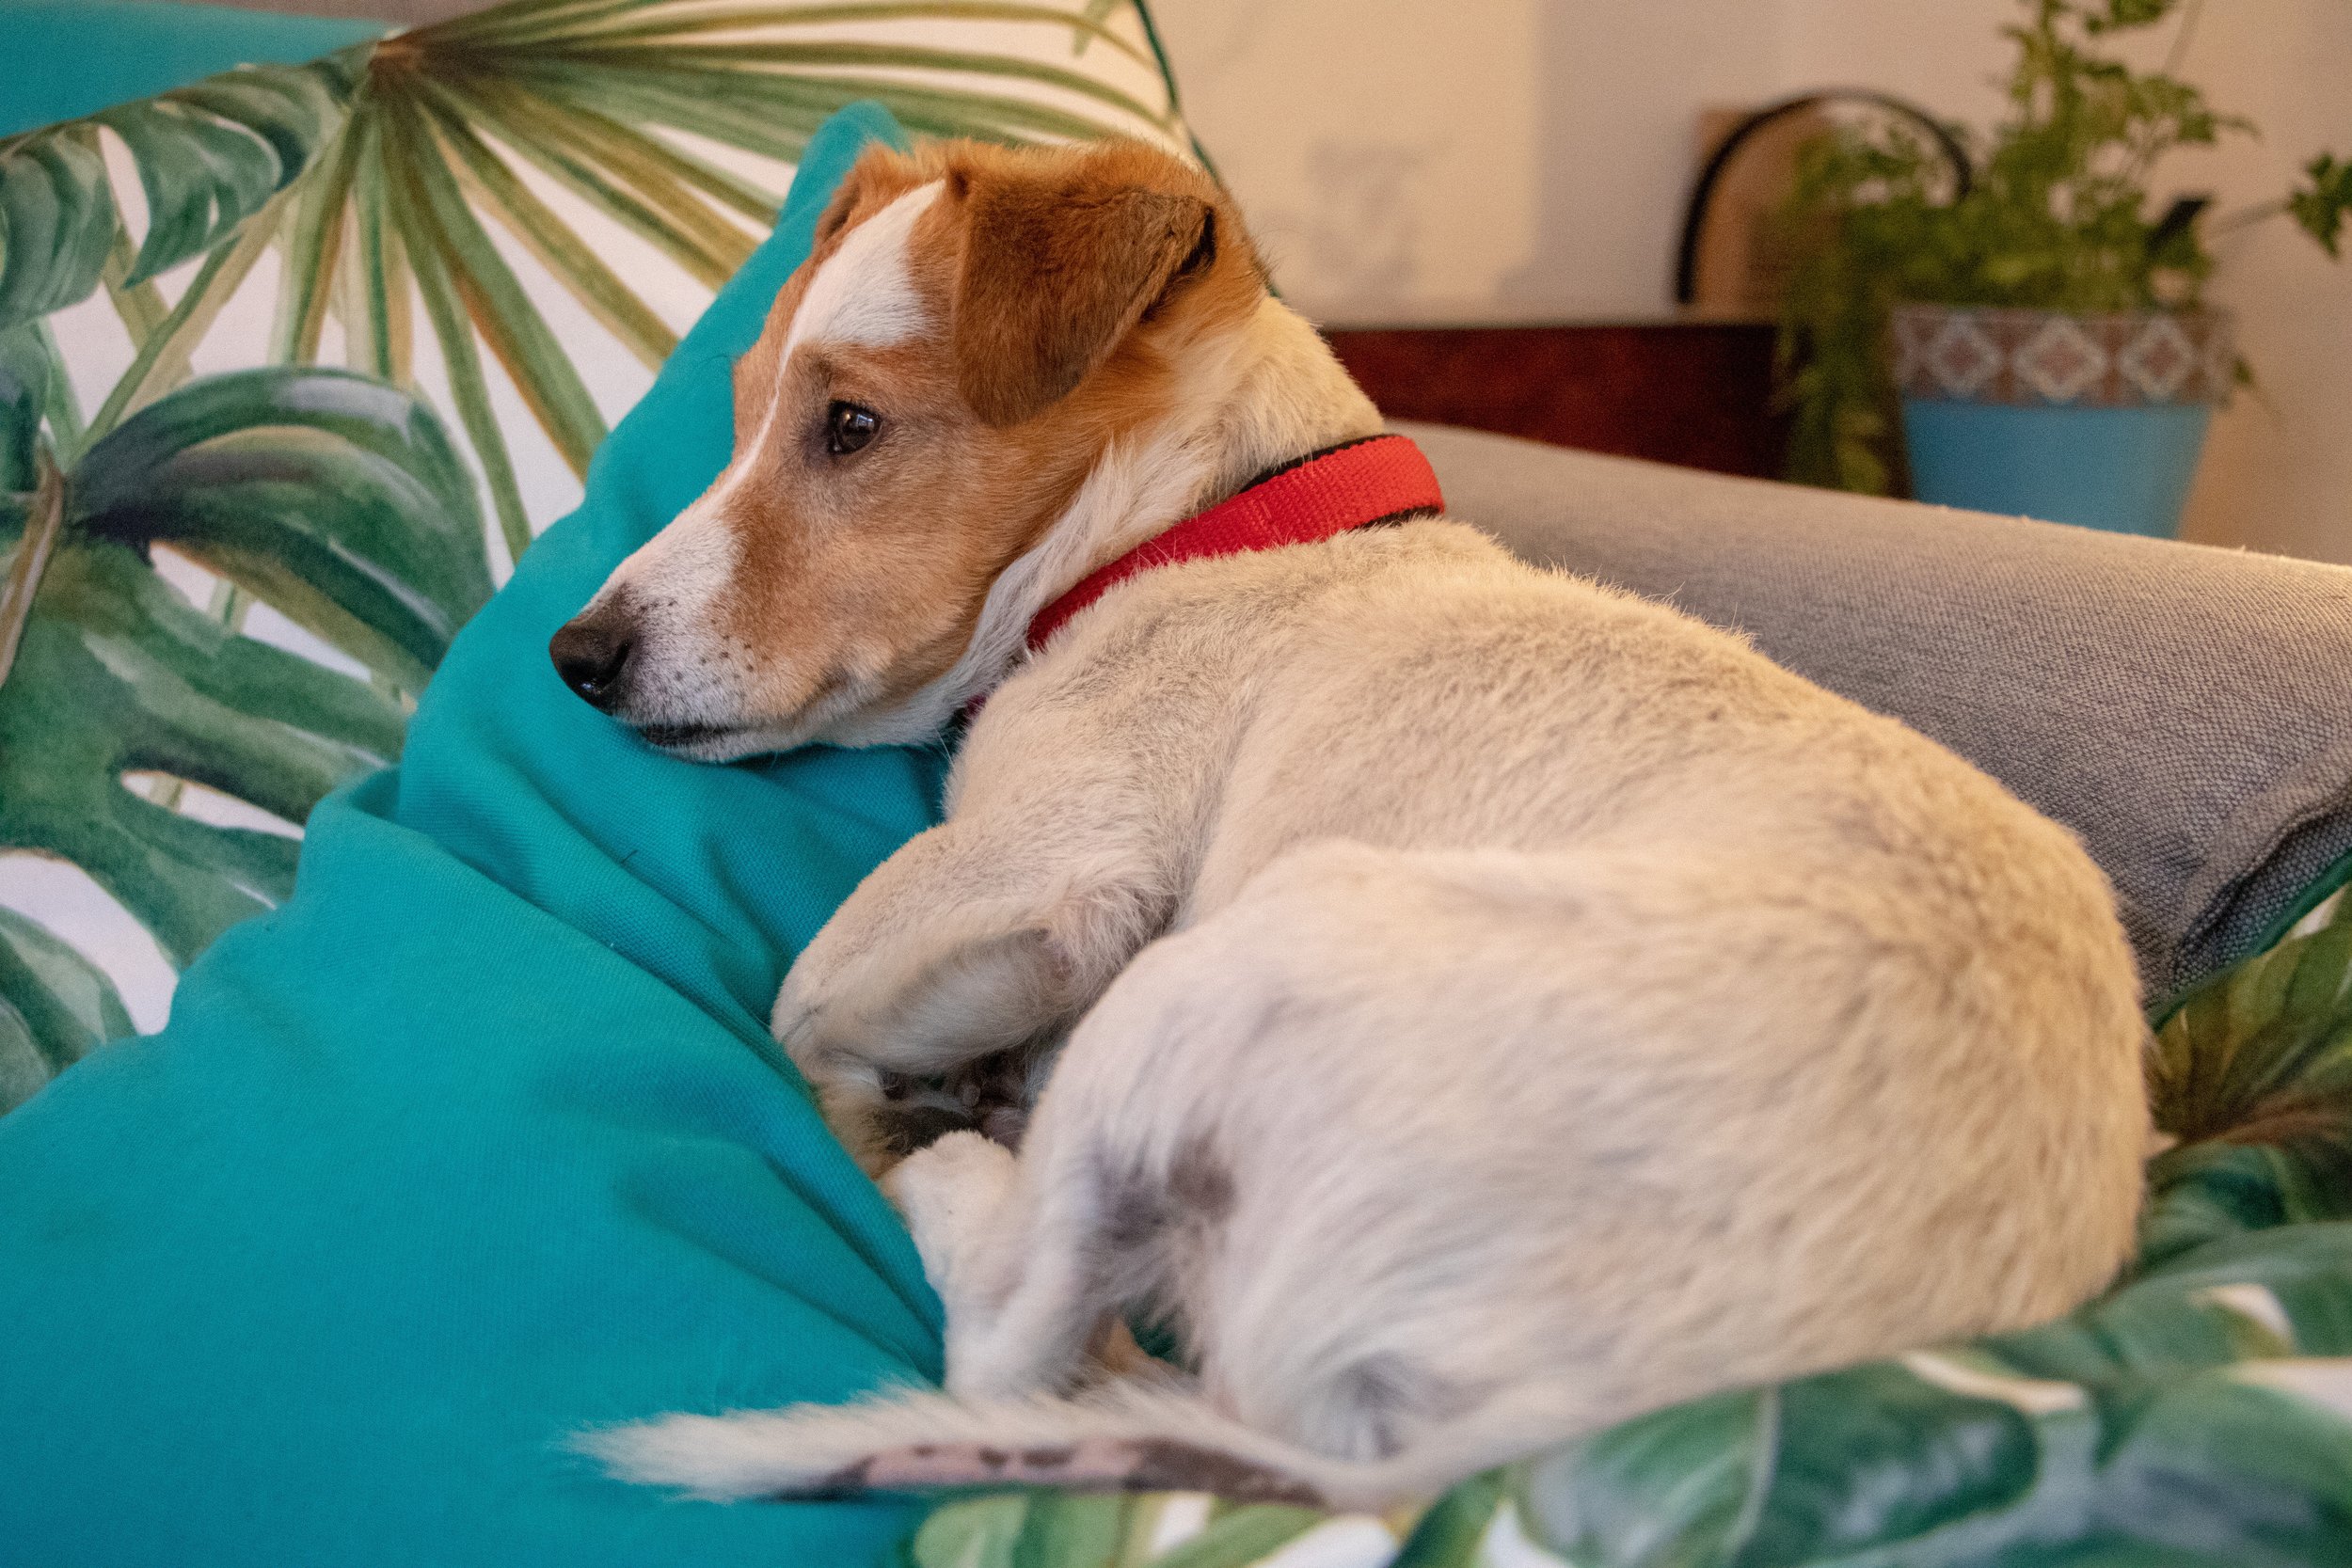 Sometimes, there’s nowhere we’d rather be than curled up on the couch.